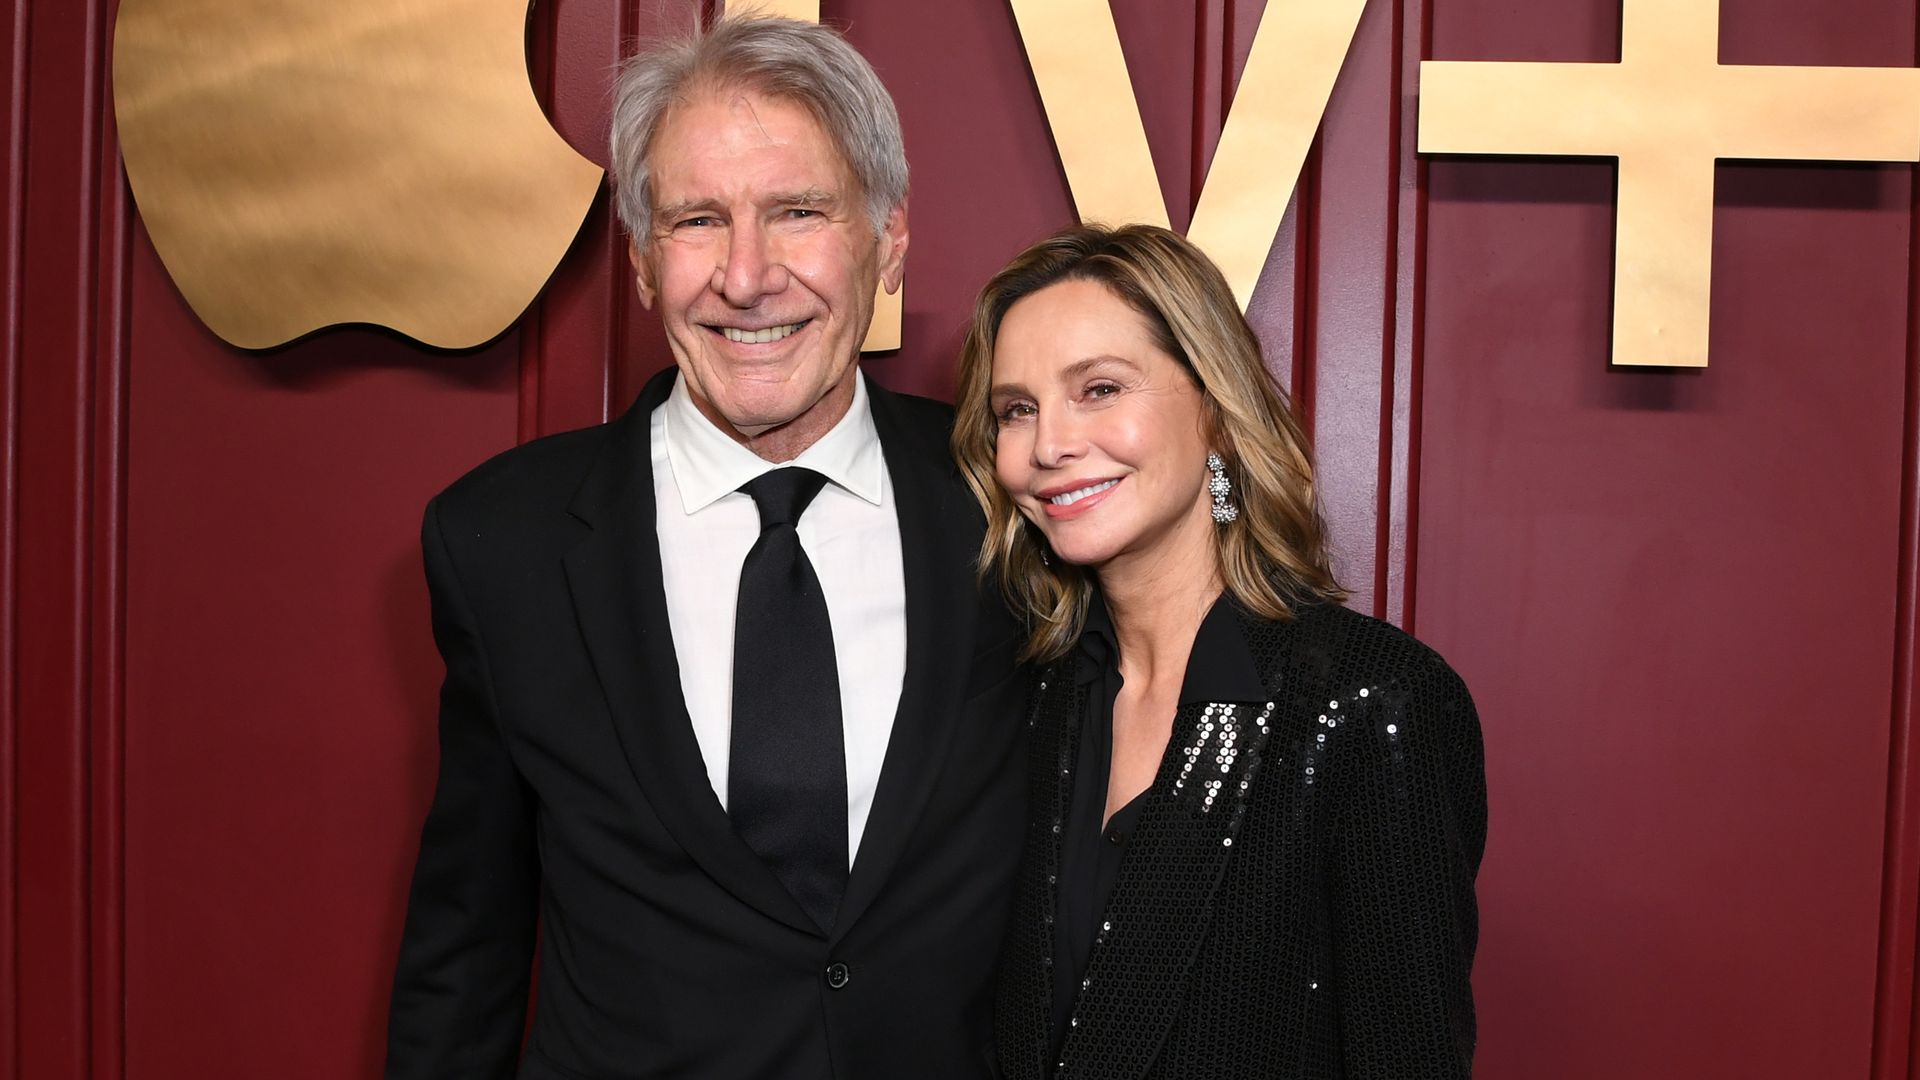 Calista Flockhart responds to husband Harrison Ford's tearful speech with emotional statement